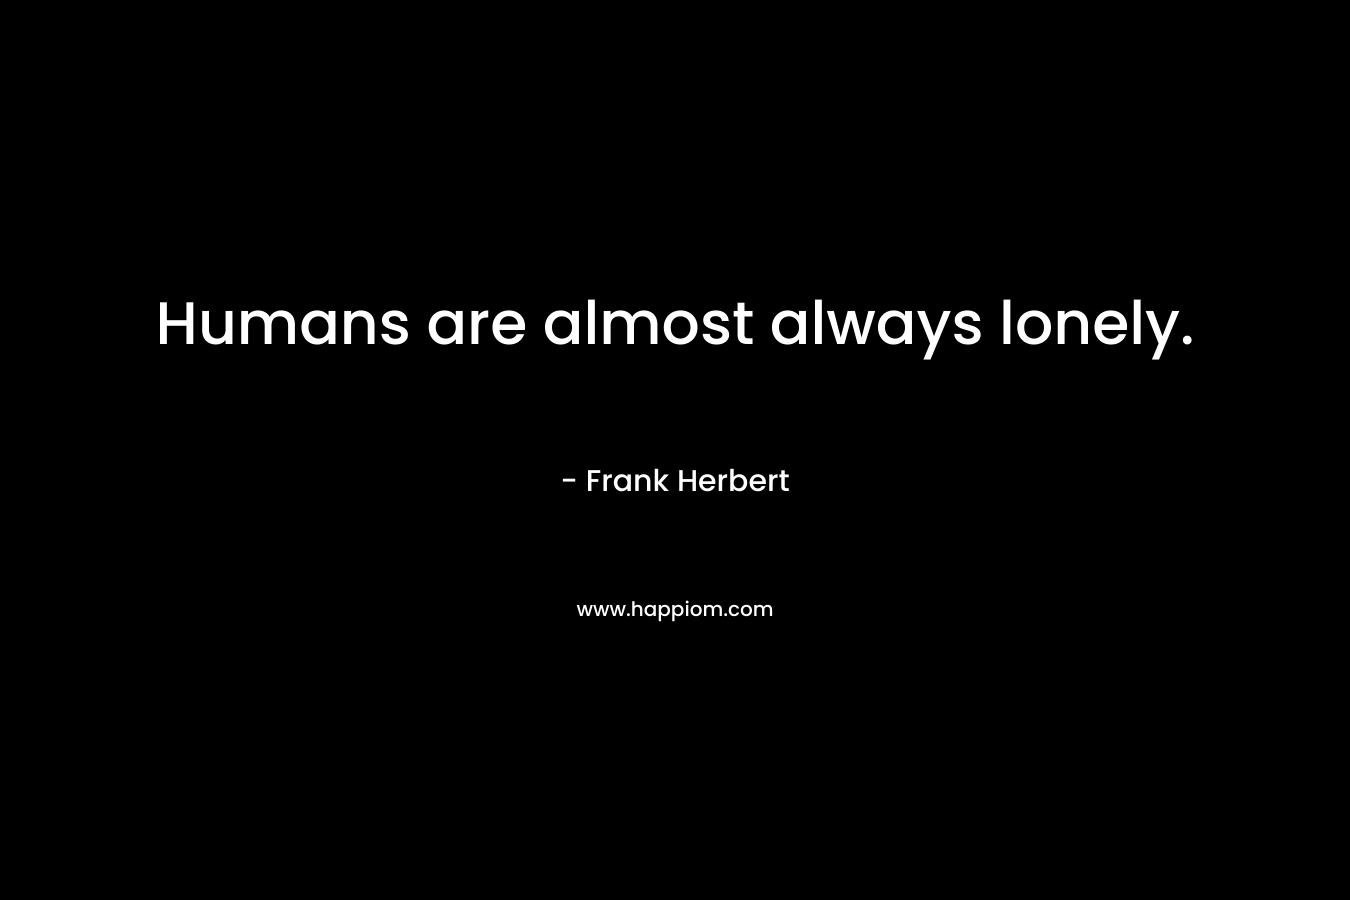 Humans are almost always lonely.